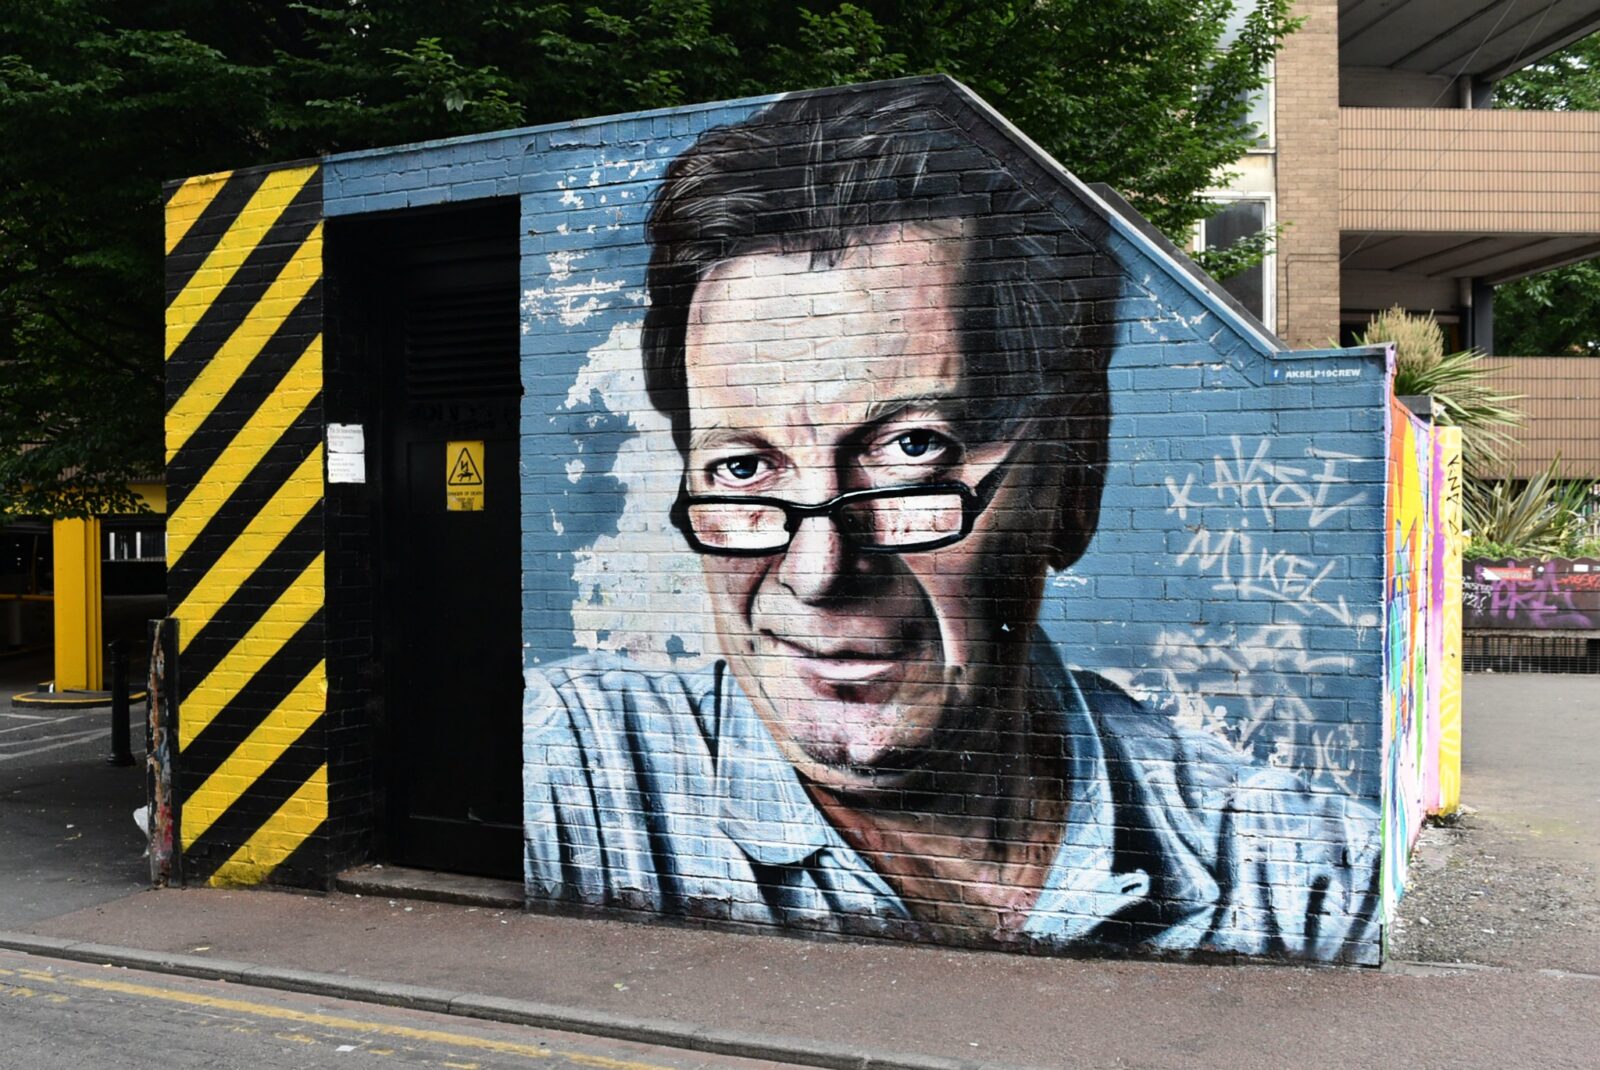 Who is Tony Wilson? Manchester